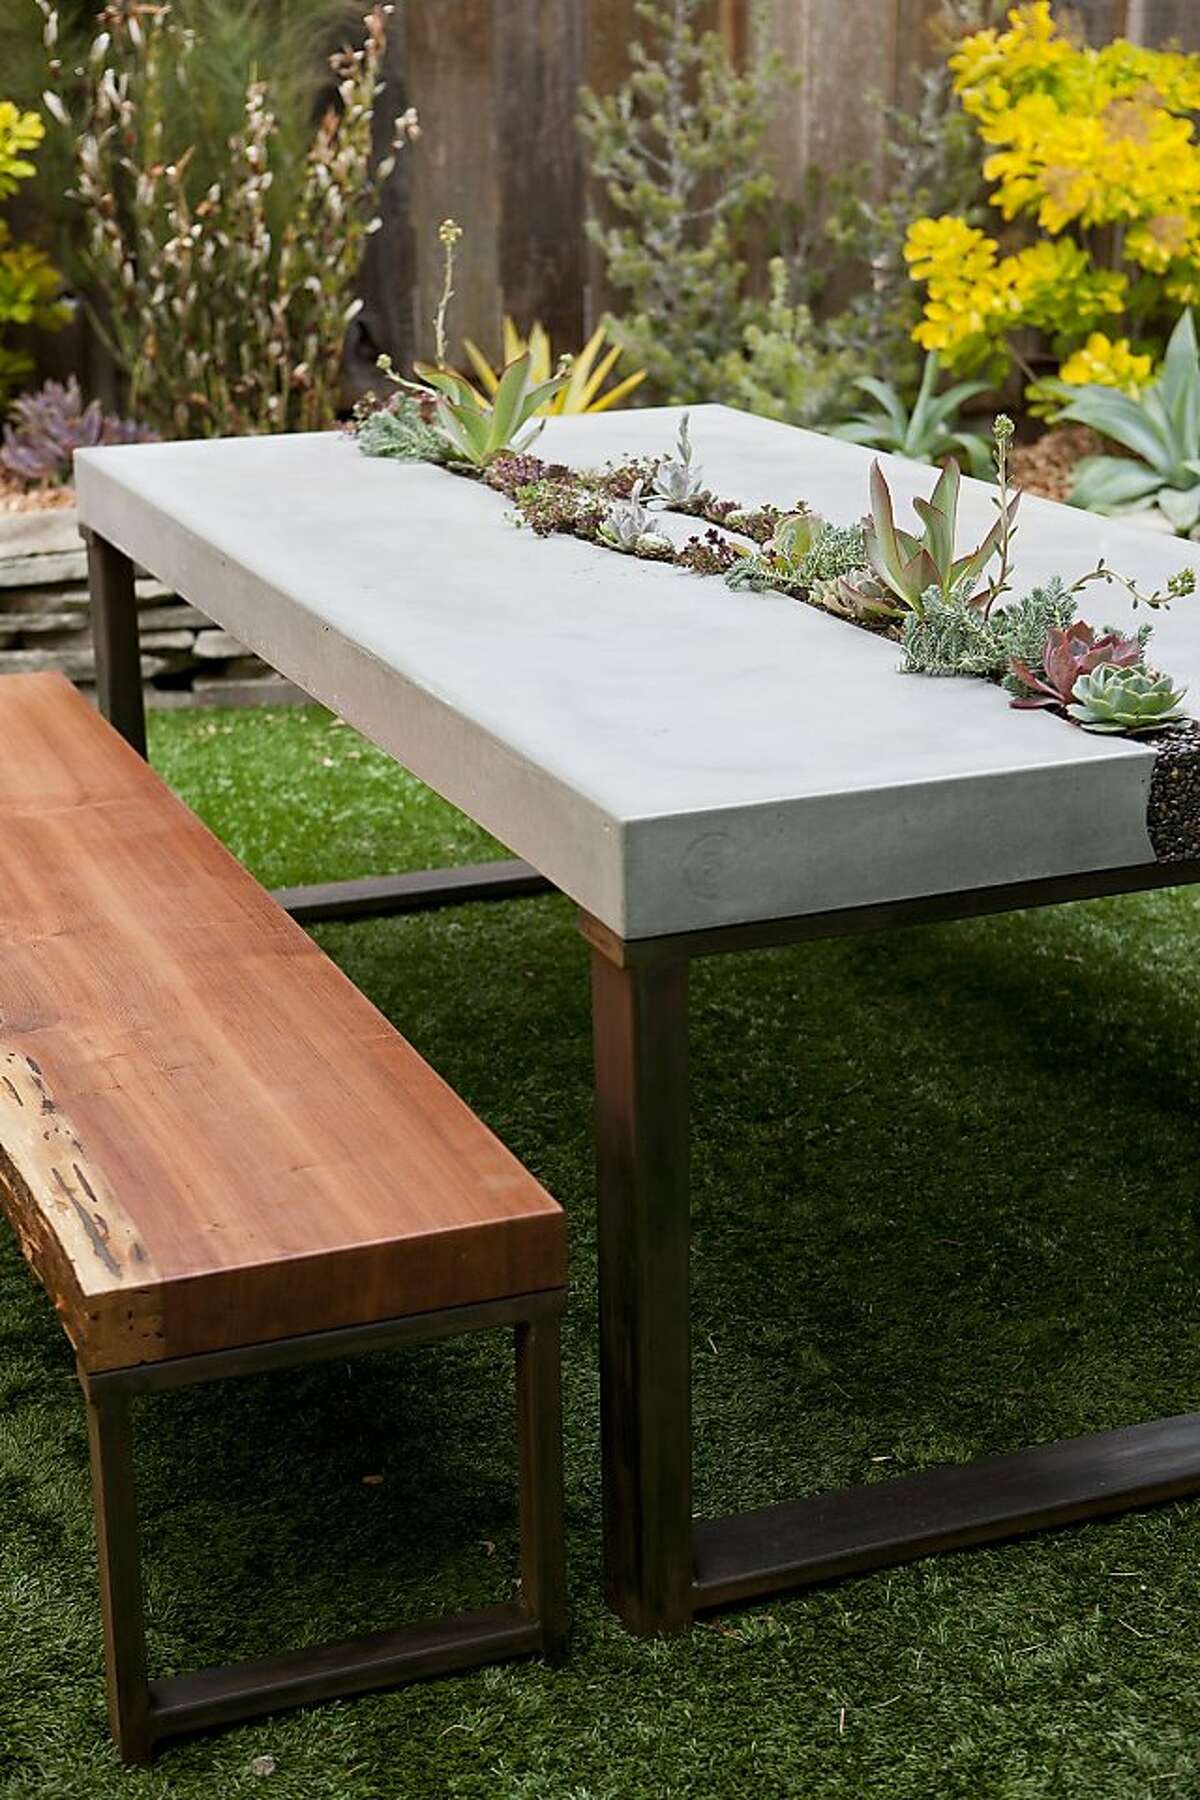 Concrete succulent table. Five Feet from the Moon¡¦s elegant table features a living centerpiece and redwood benches made from a fallen tree. $6,000, including plants, $8,000 with redwood benches. www.fivefeet?’©fromthemoon.com